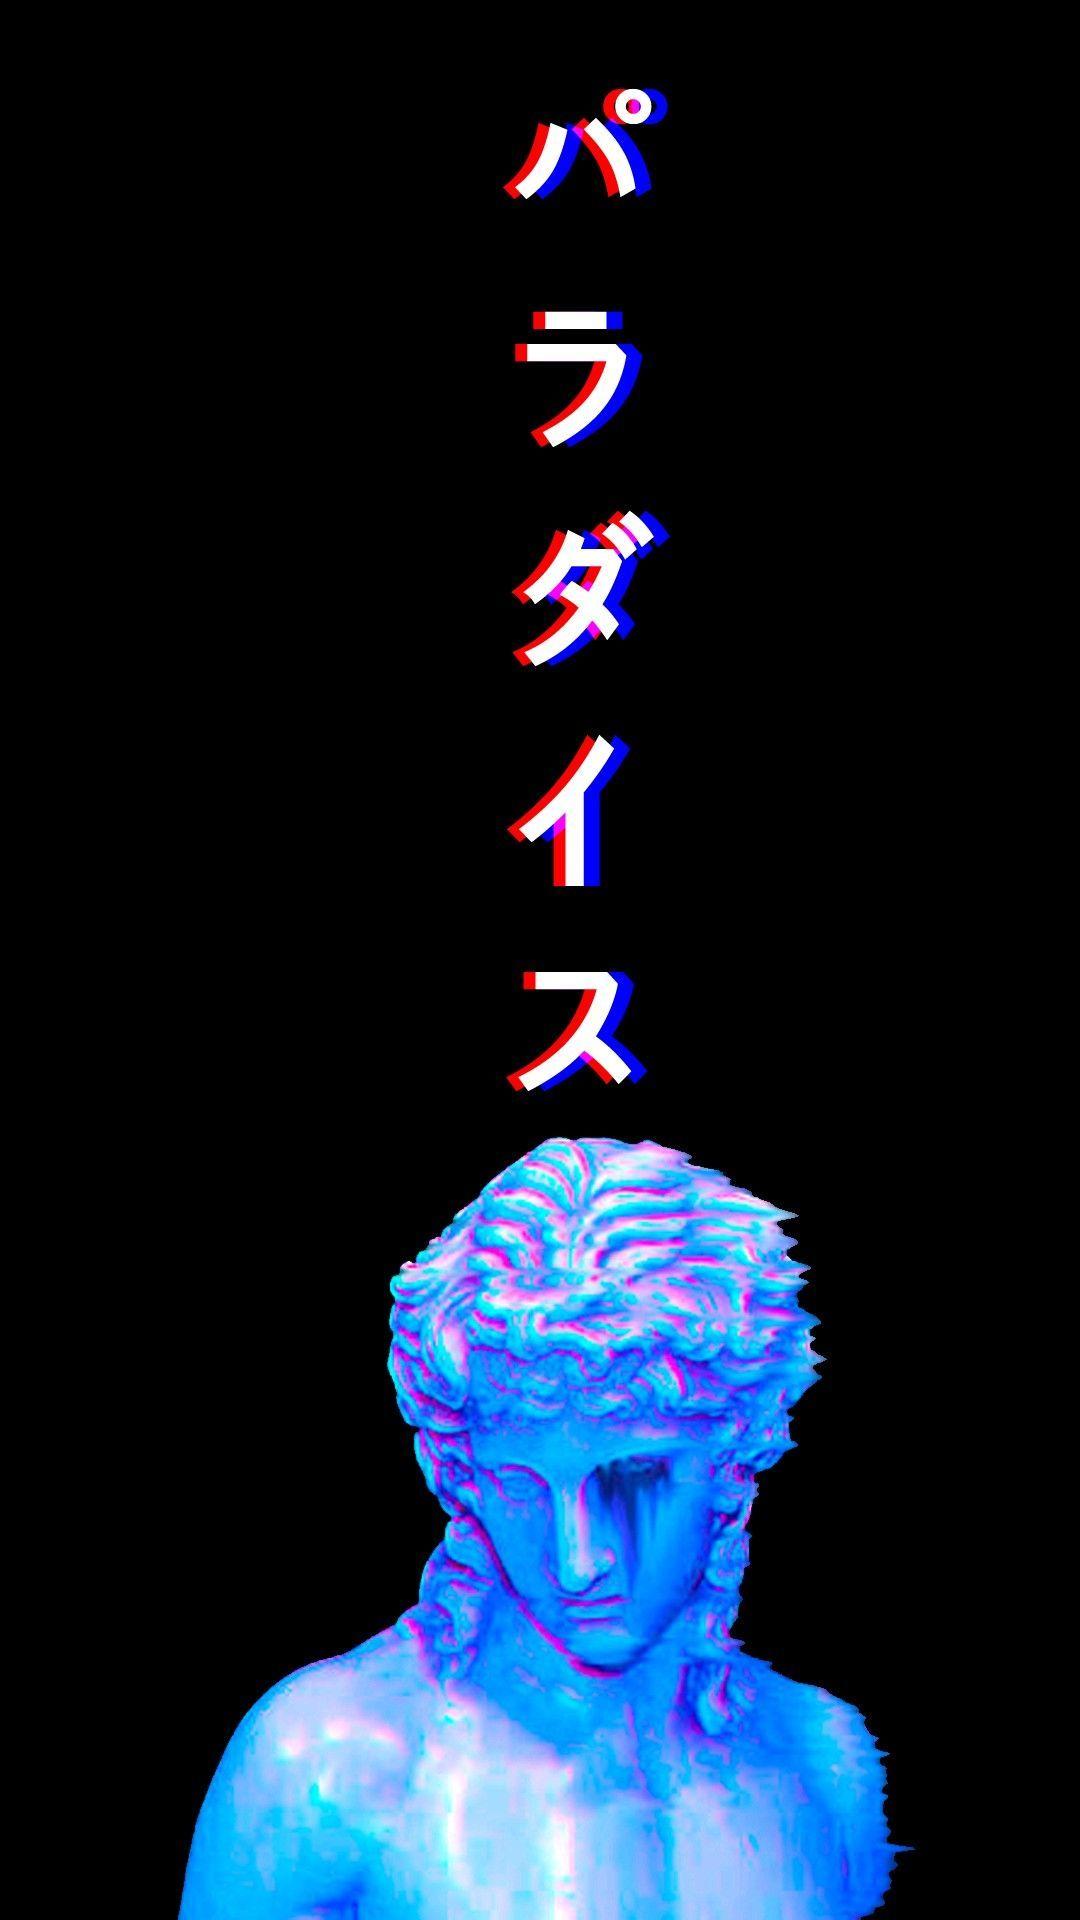  Glitch  Aesthetic  Wallpapers  Top Free Glitch  Aesthetic  